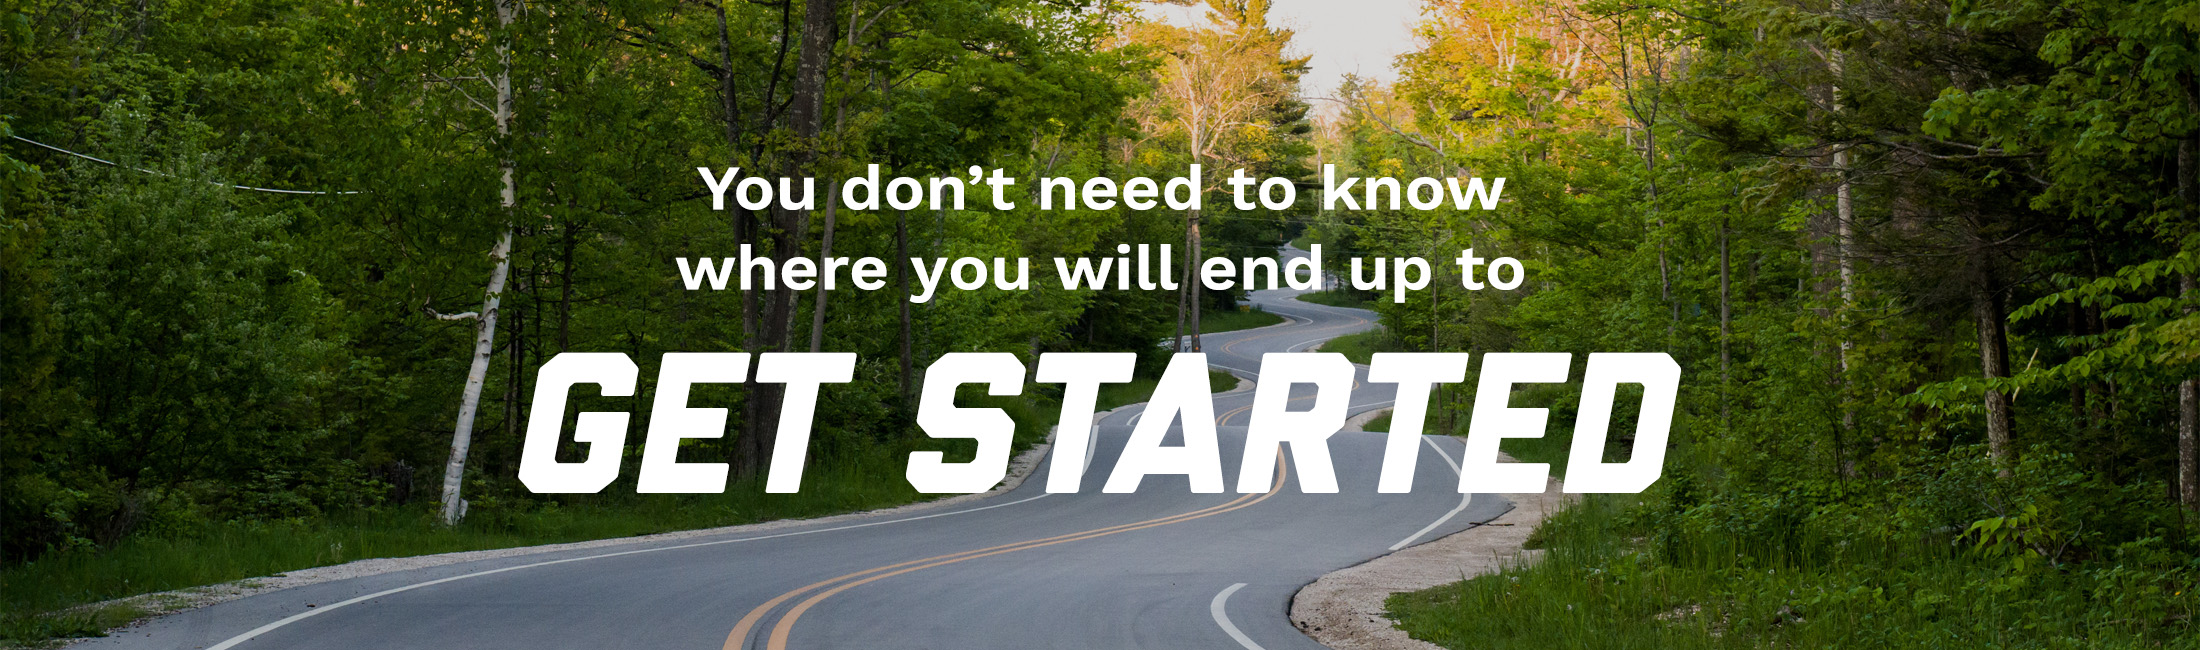 You don't need to know where you will end up to get started